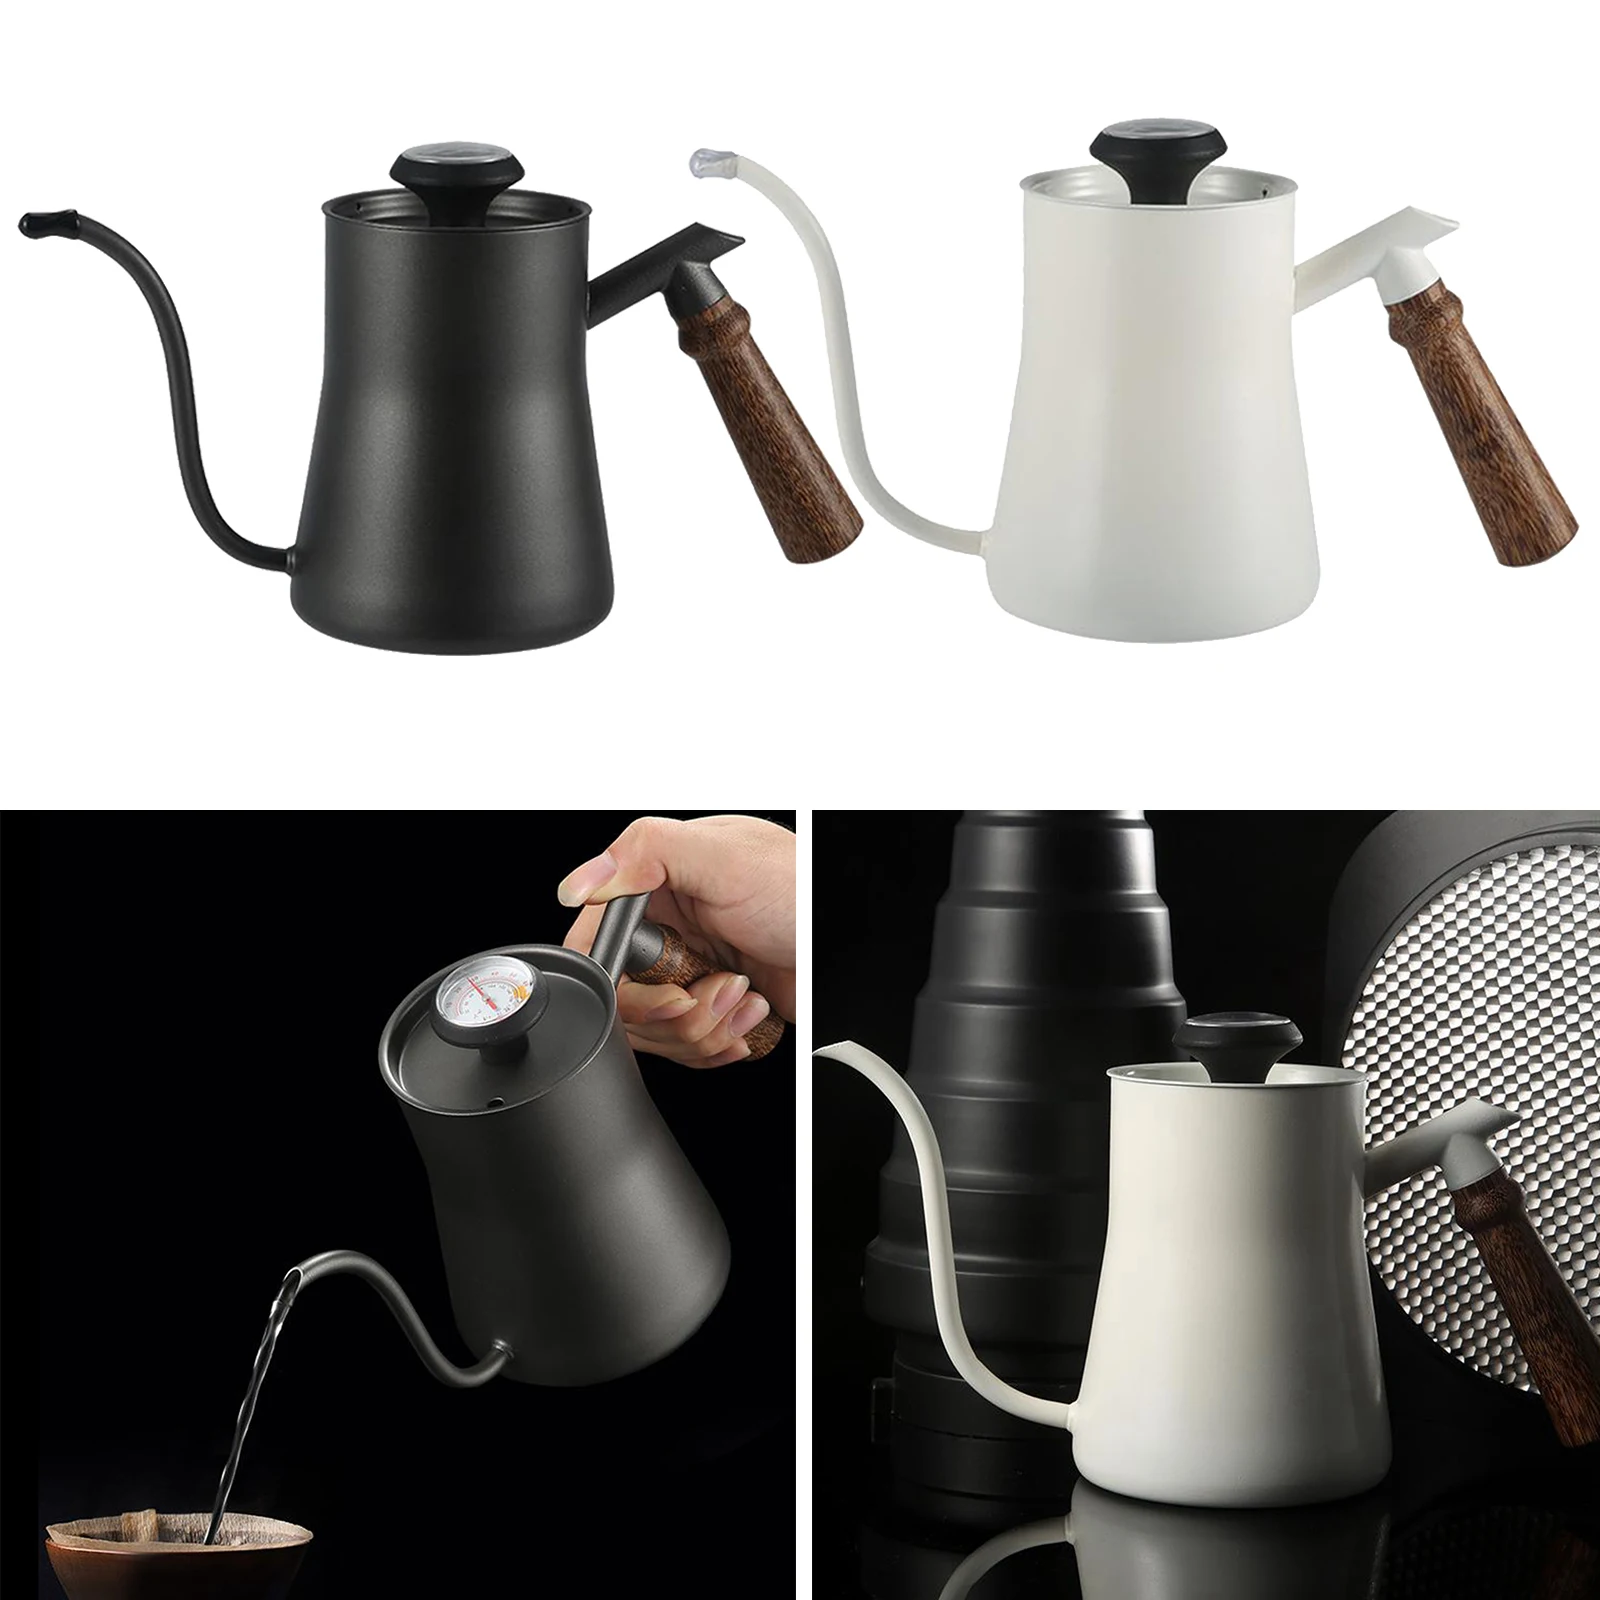 

650ml Gooseneck Kettle Stainless Steel Tea Spout with Thermometer Control the Temperature, for Barista Home, Coffee Drip Pot